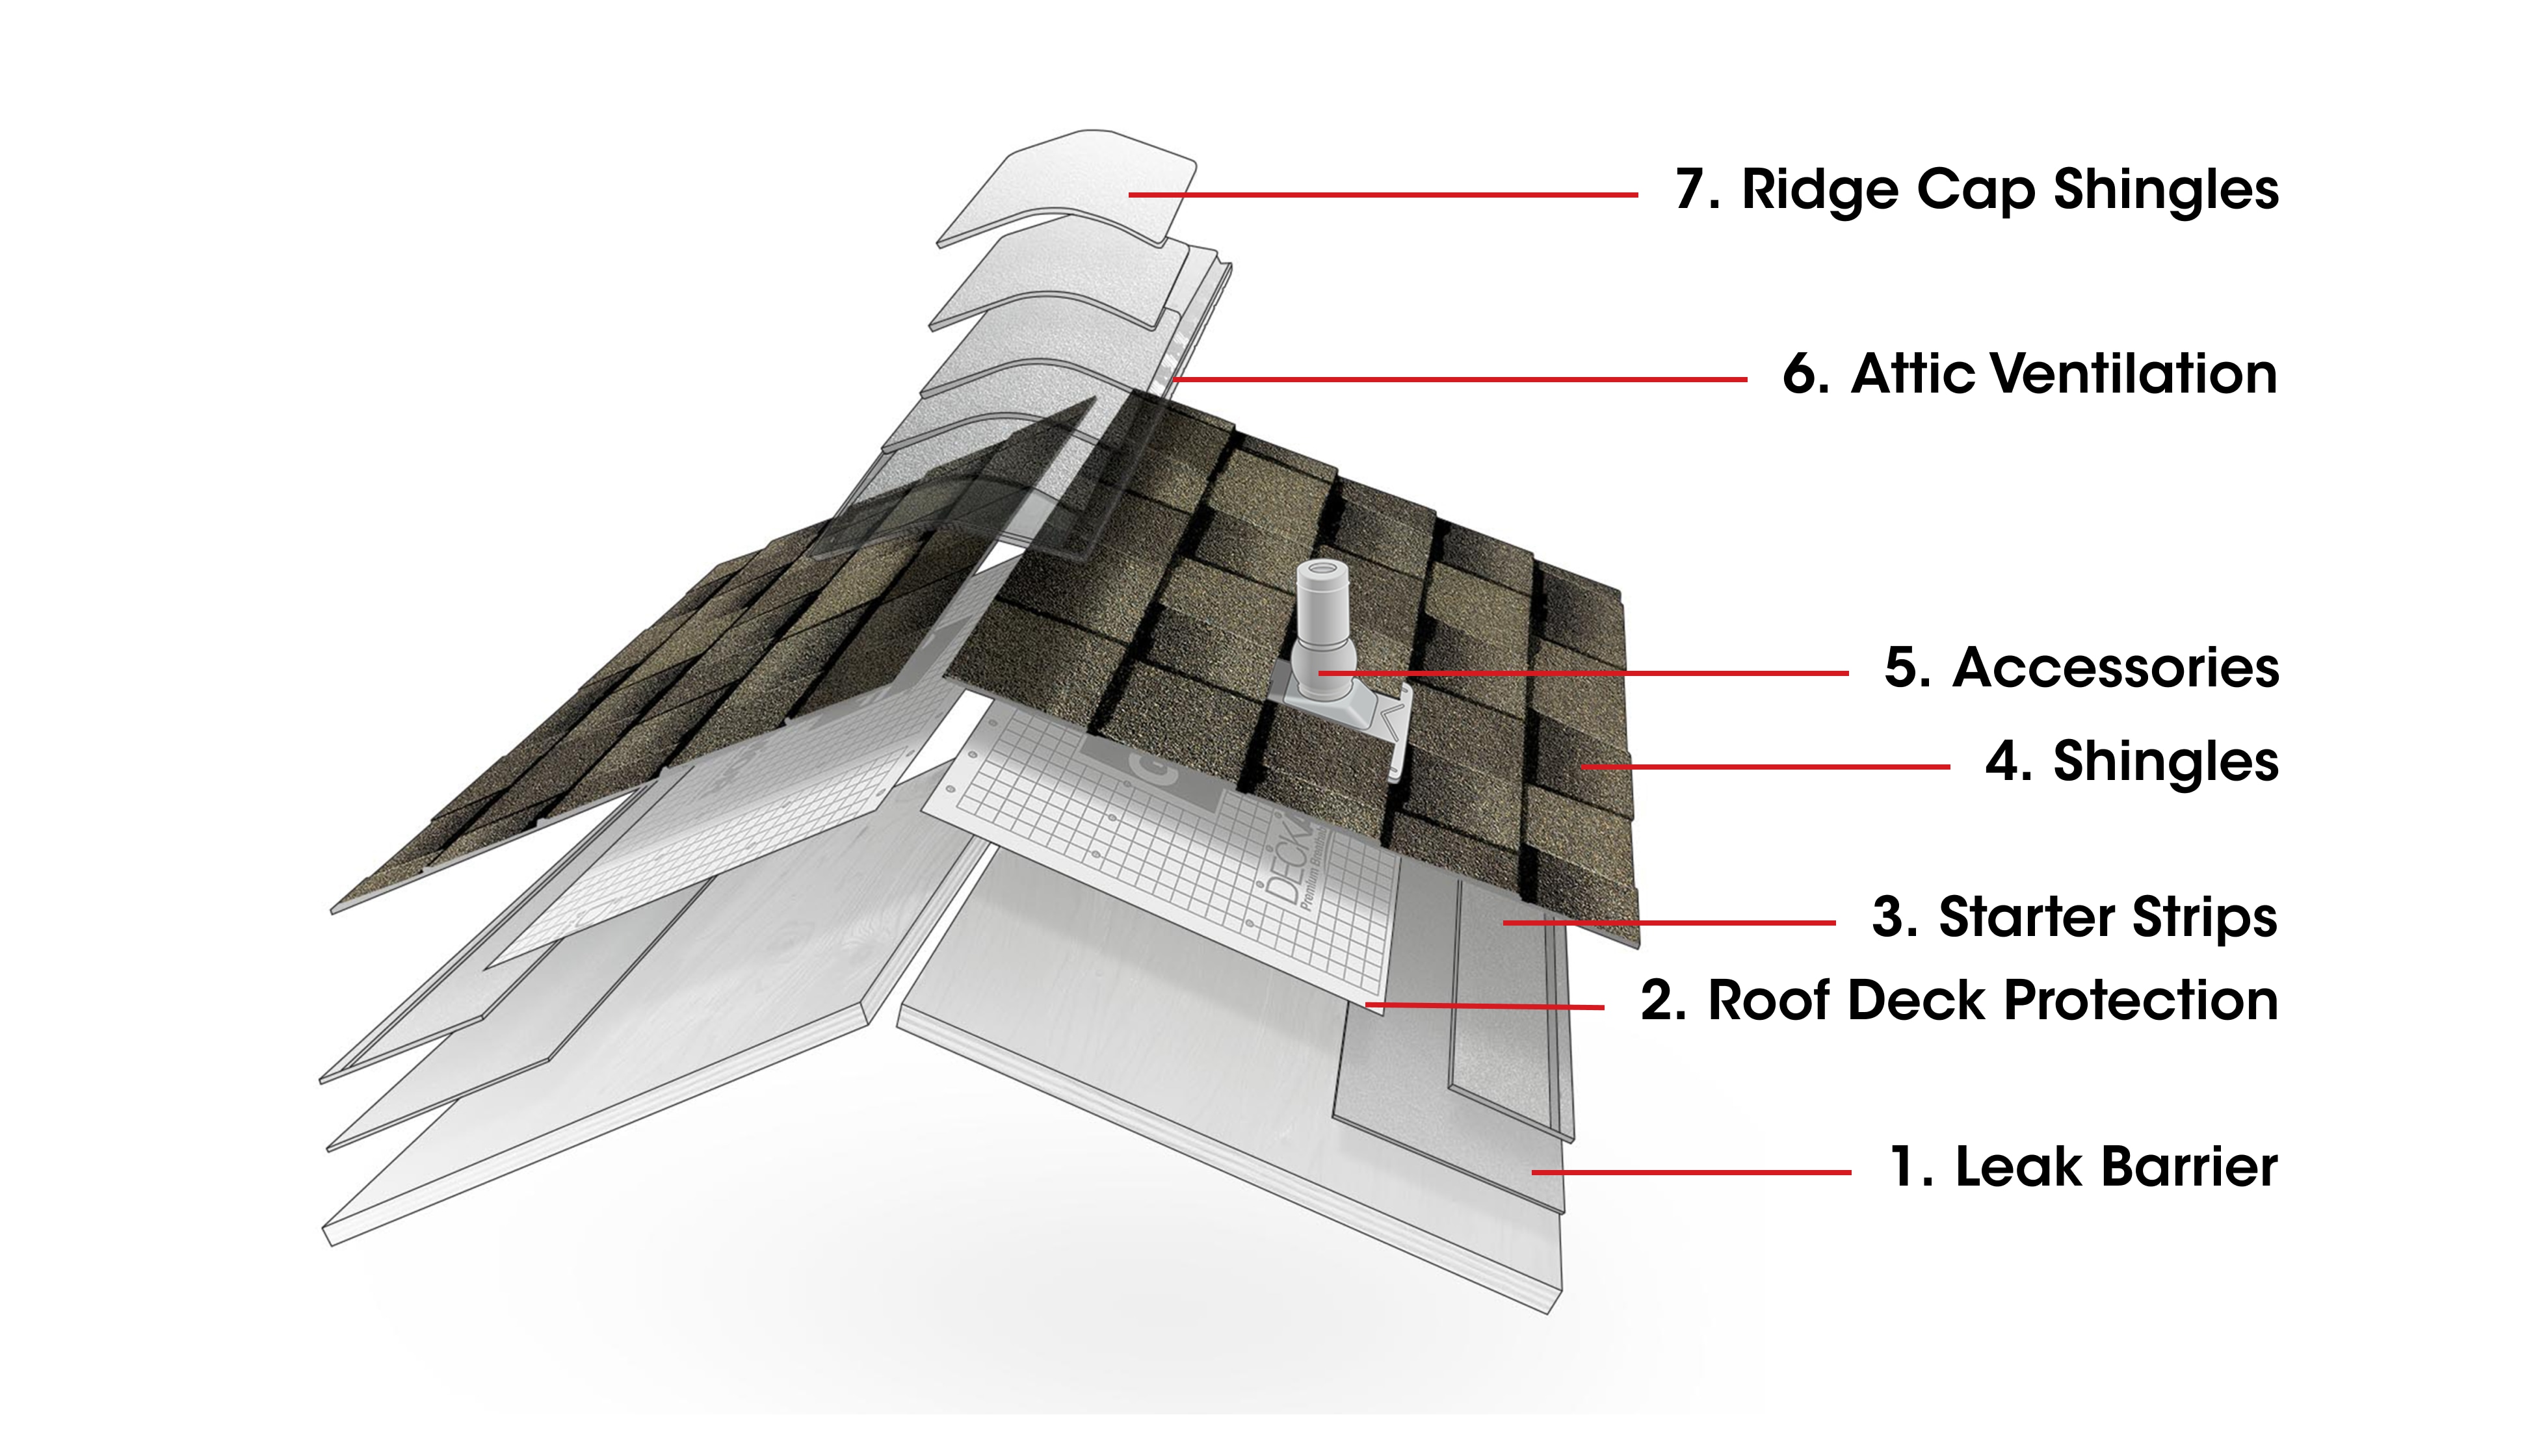 Components of a residential roofing system